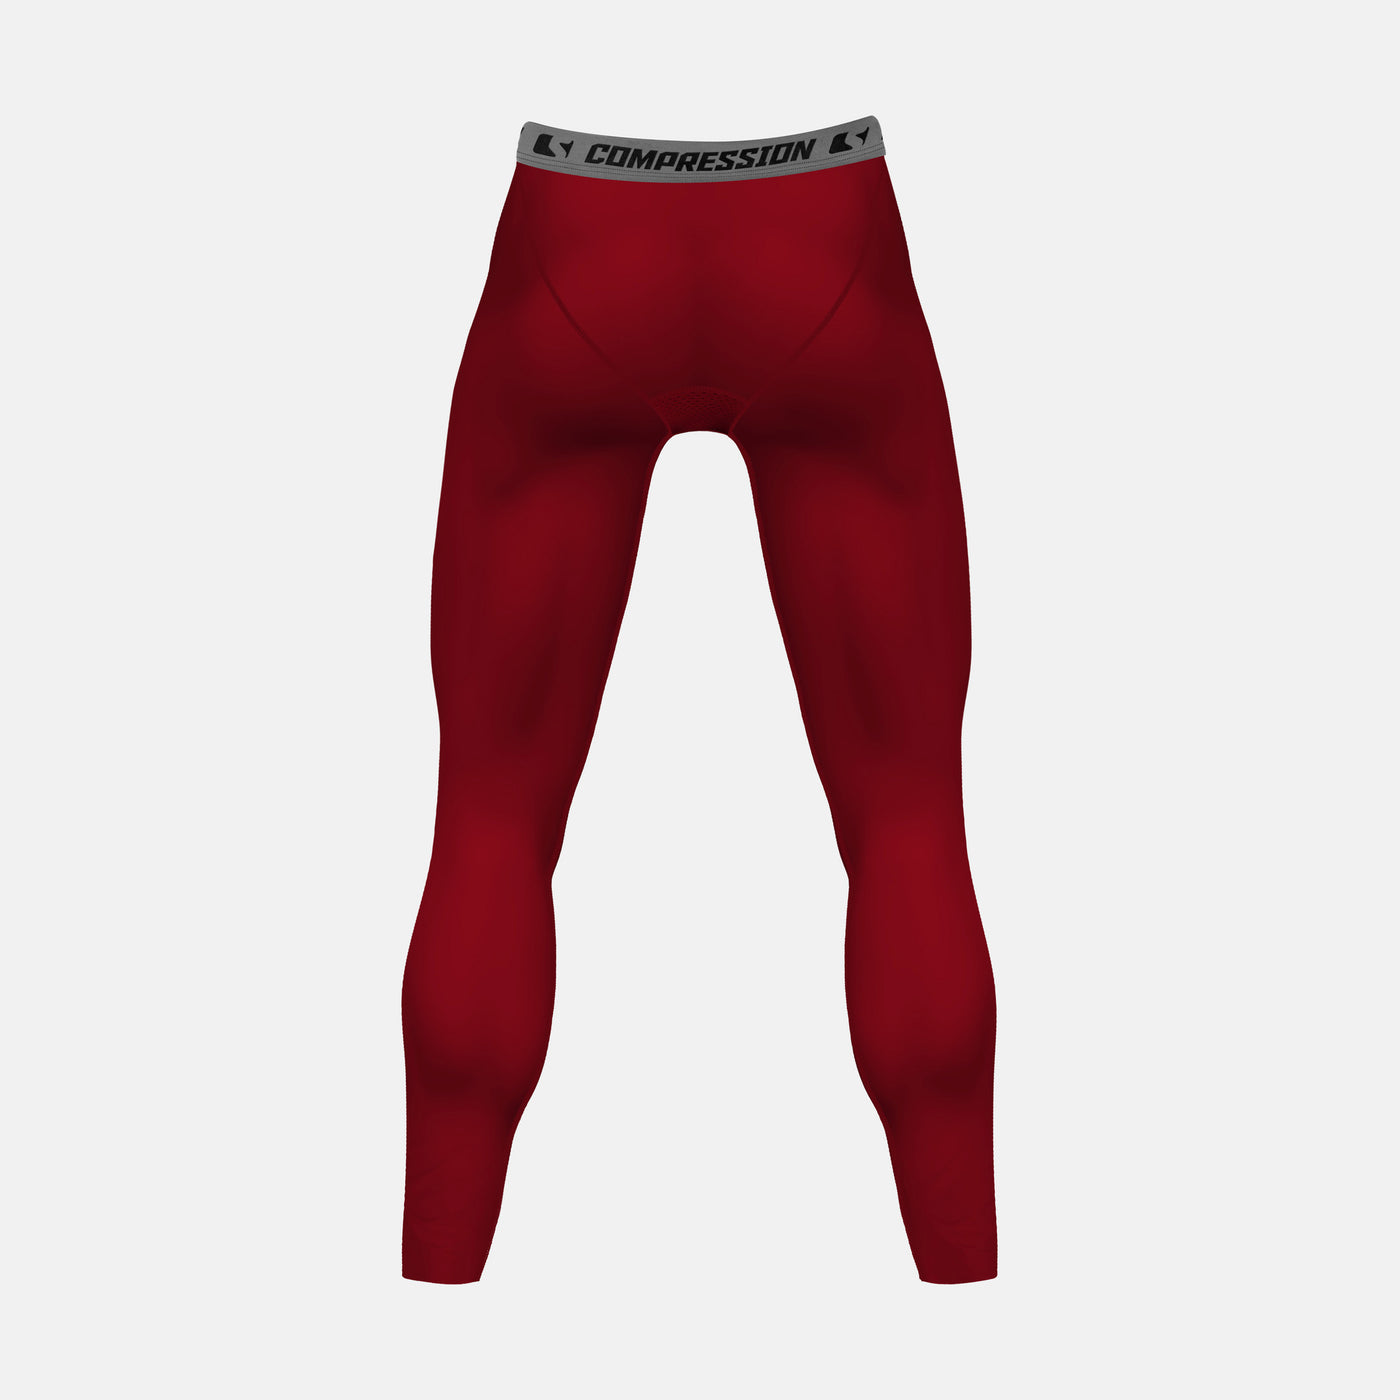 Cardinal Red Tights for men